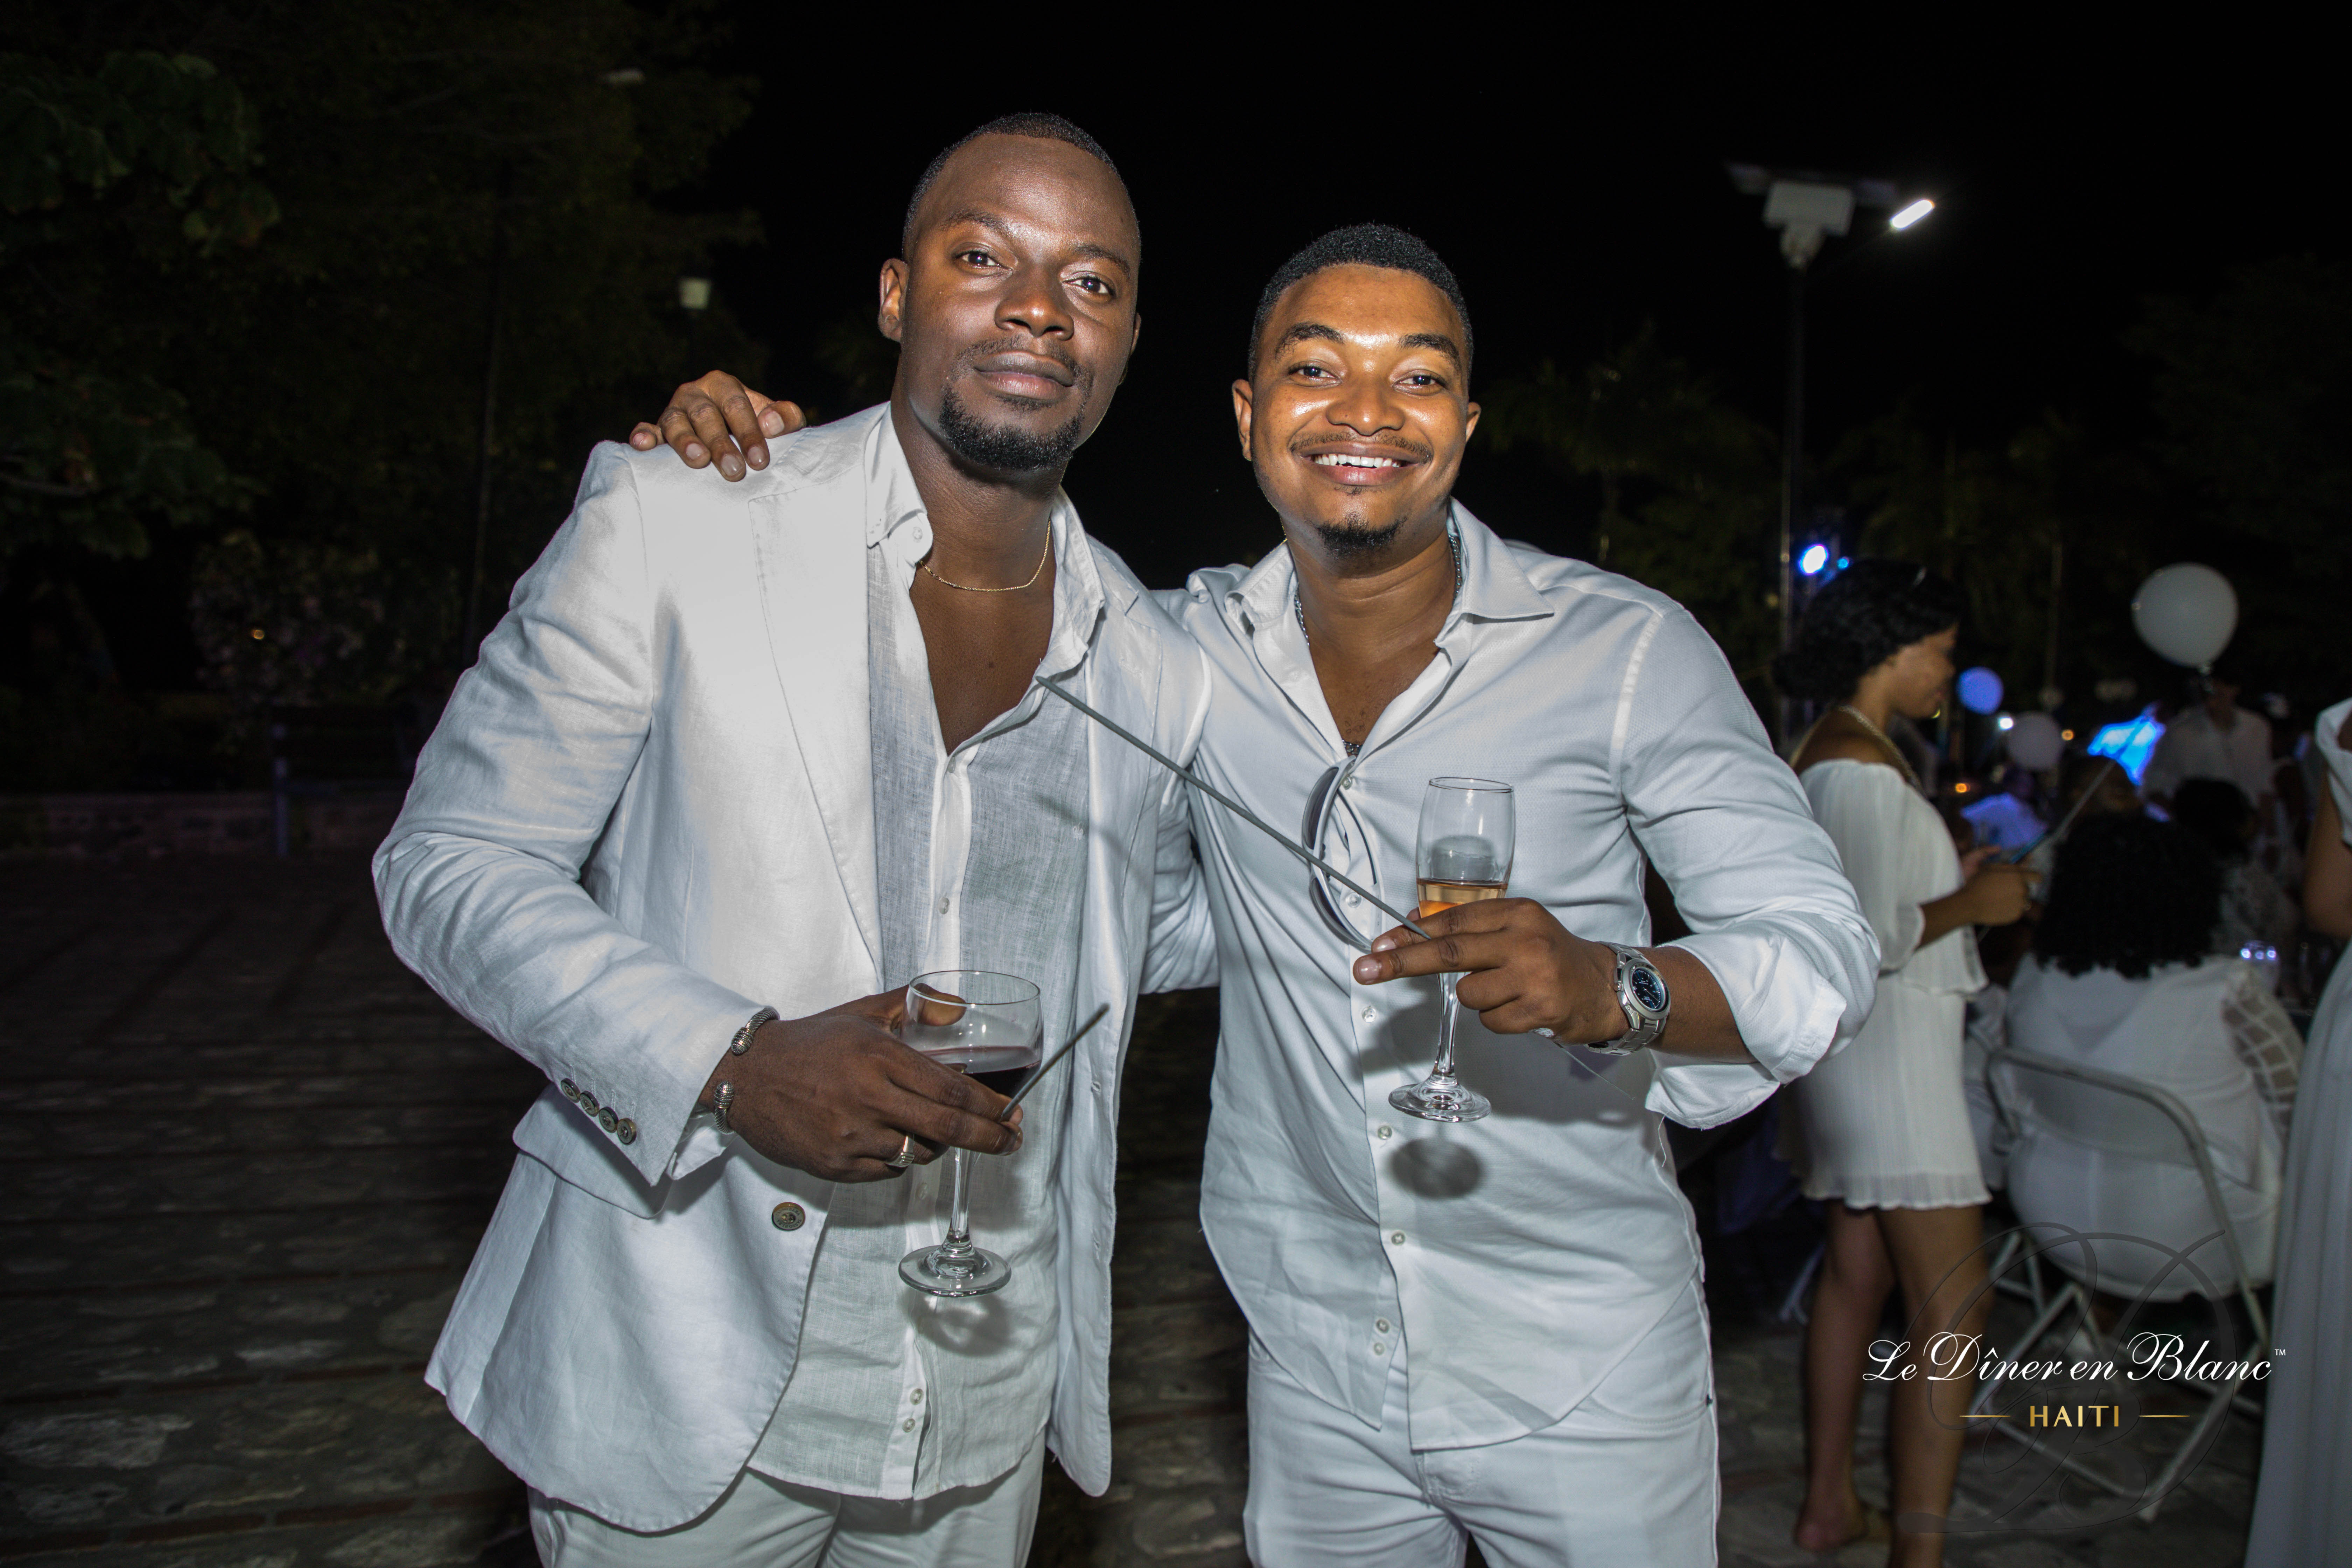 These Photos From Haiti's Dîner en Blanc Have Us Ready To Party Like Haitians